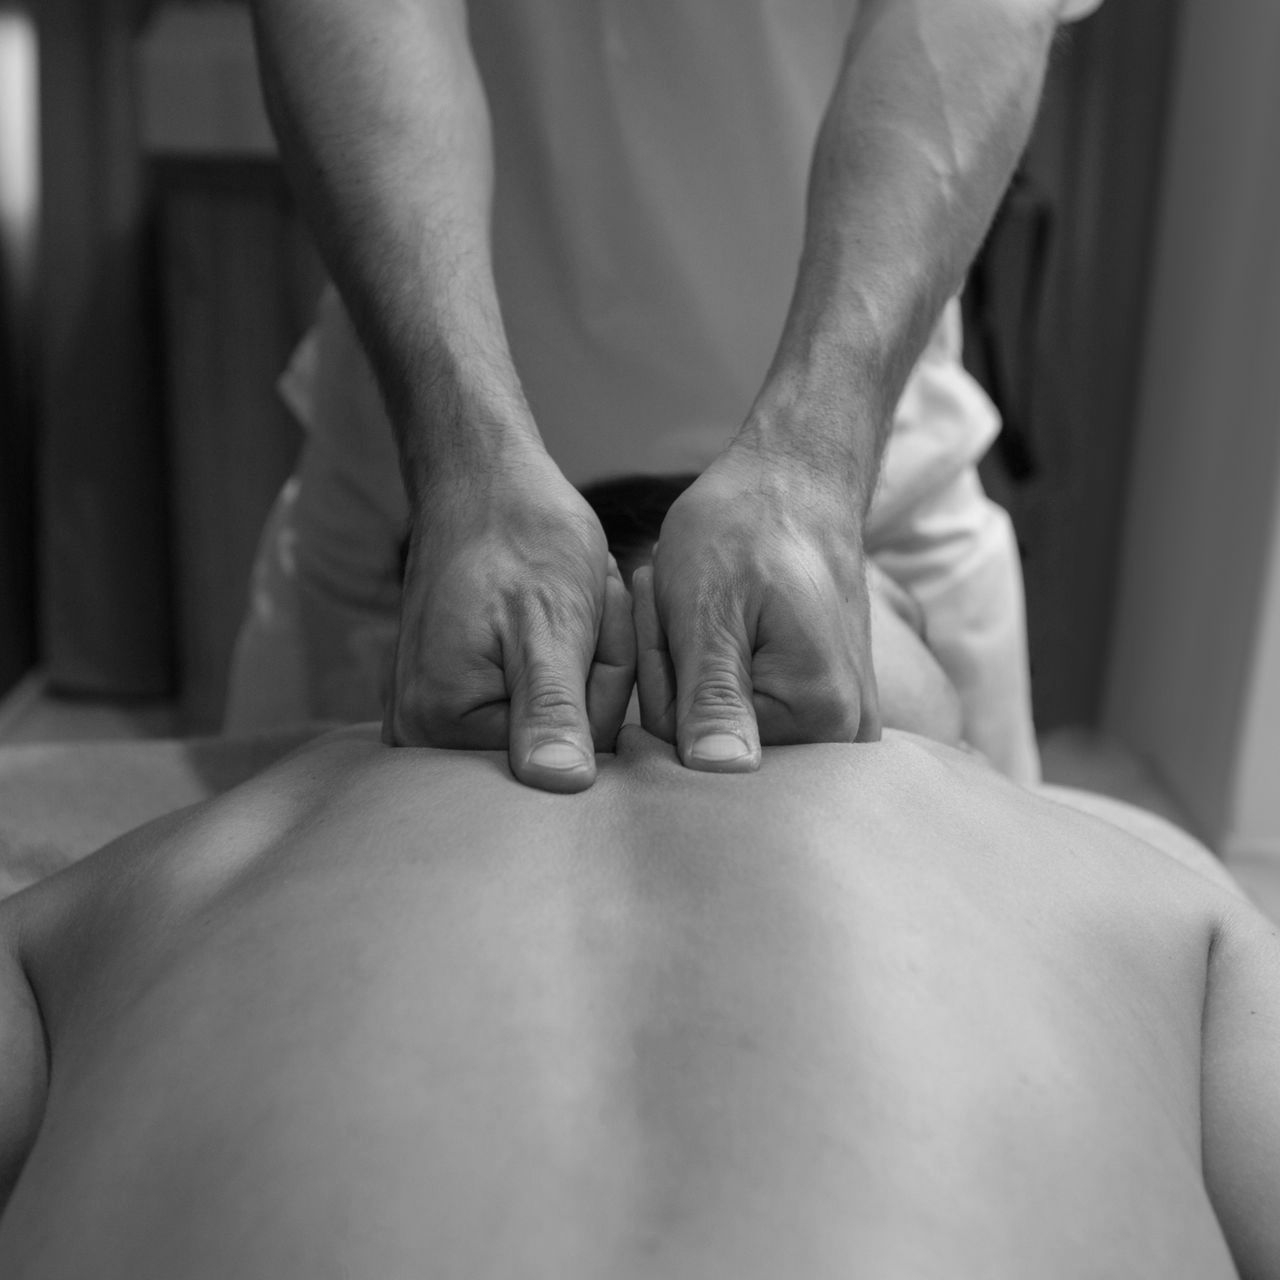 a man is giving a woman a massage on her back .